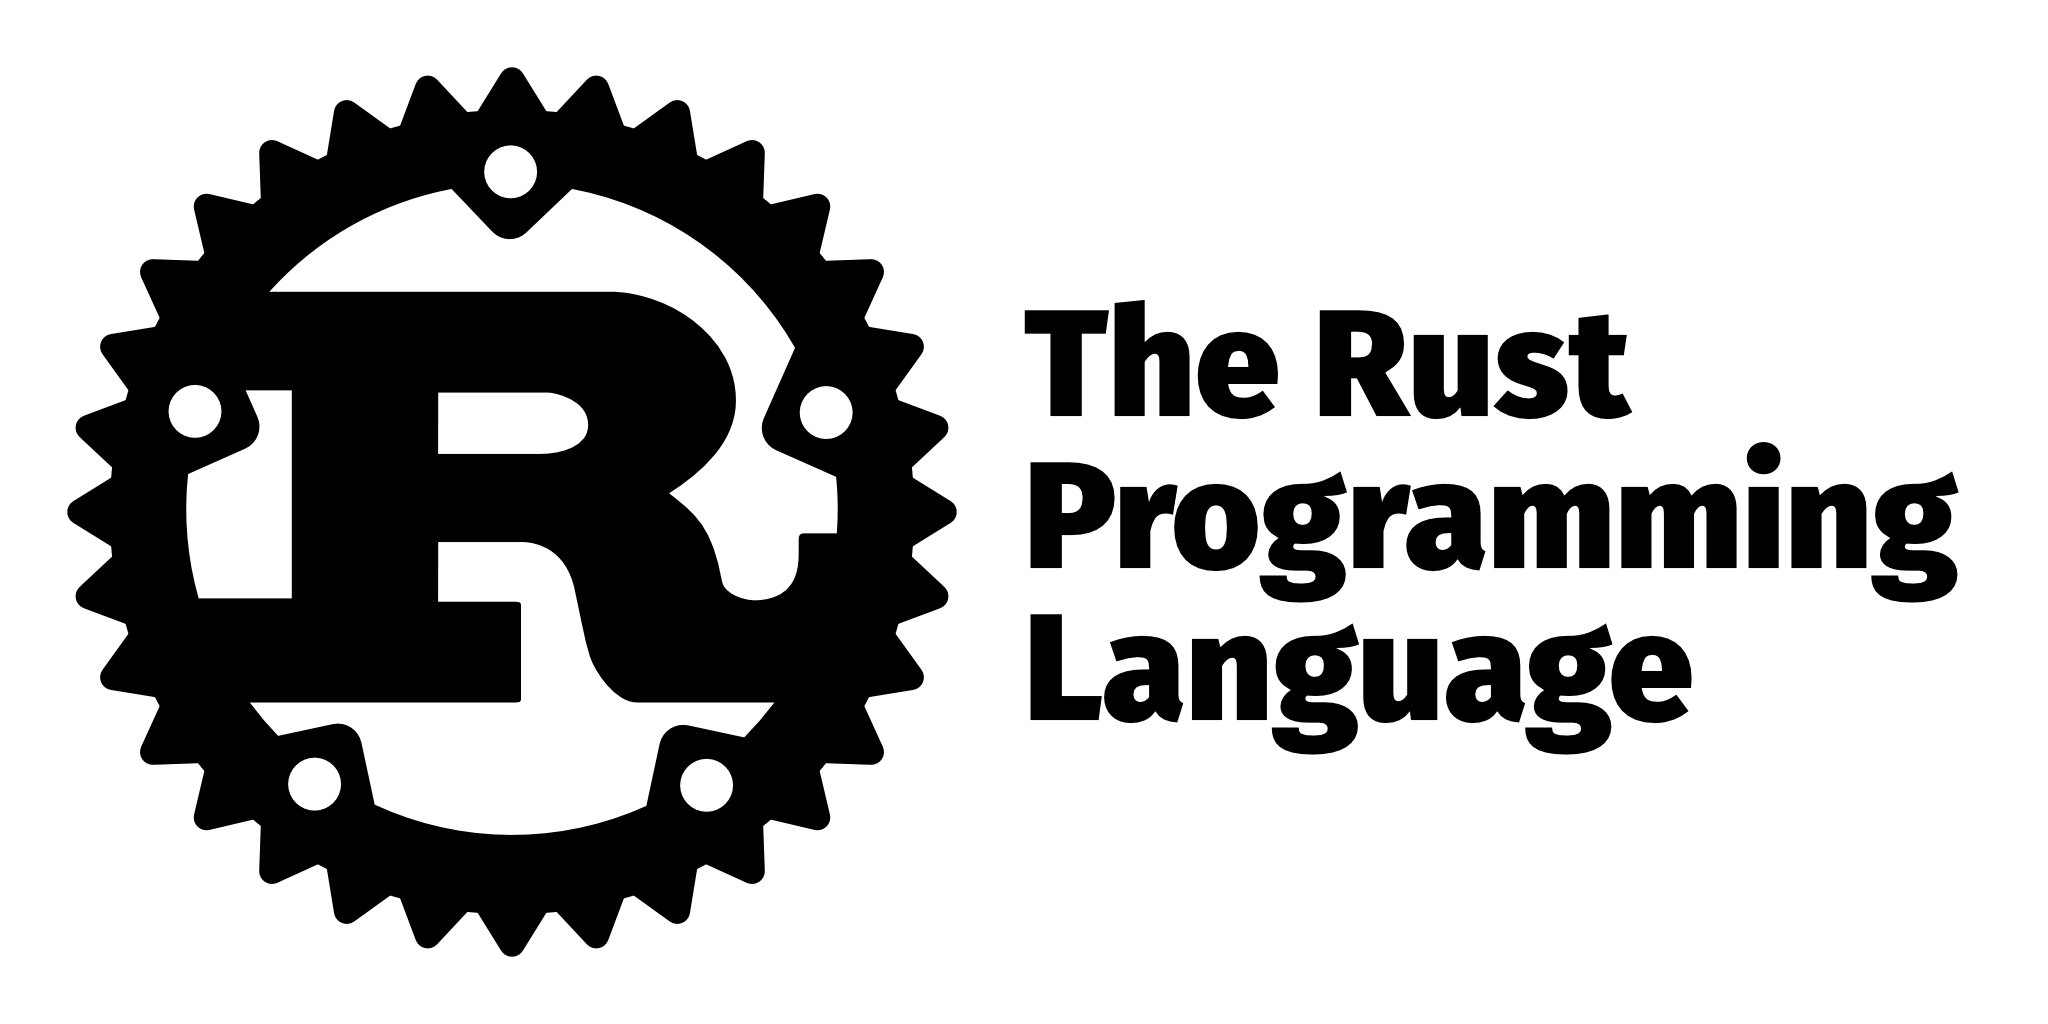 A flaw in Rust Programming language could allow to delete files and directories